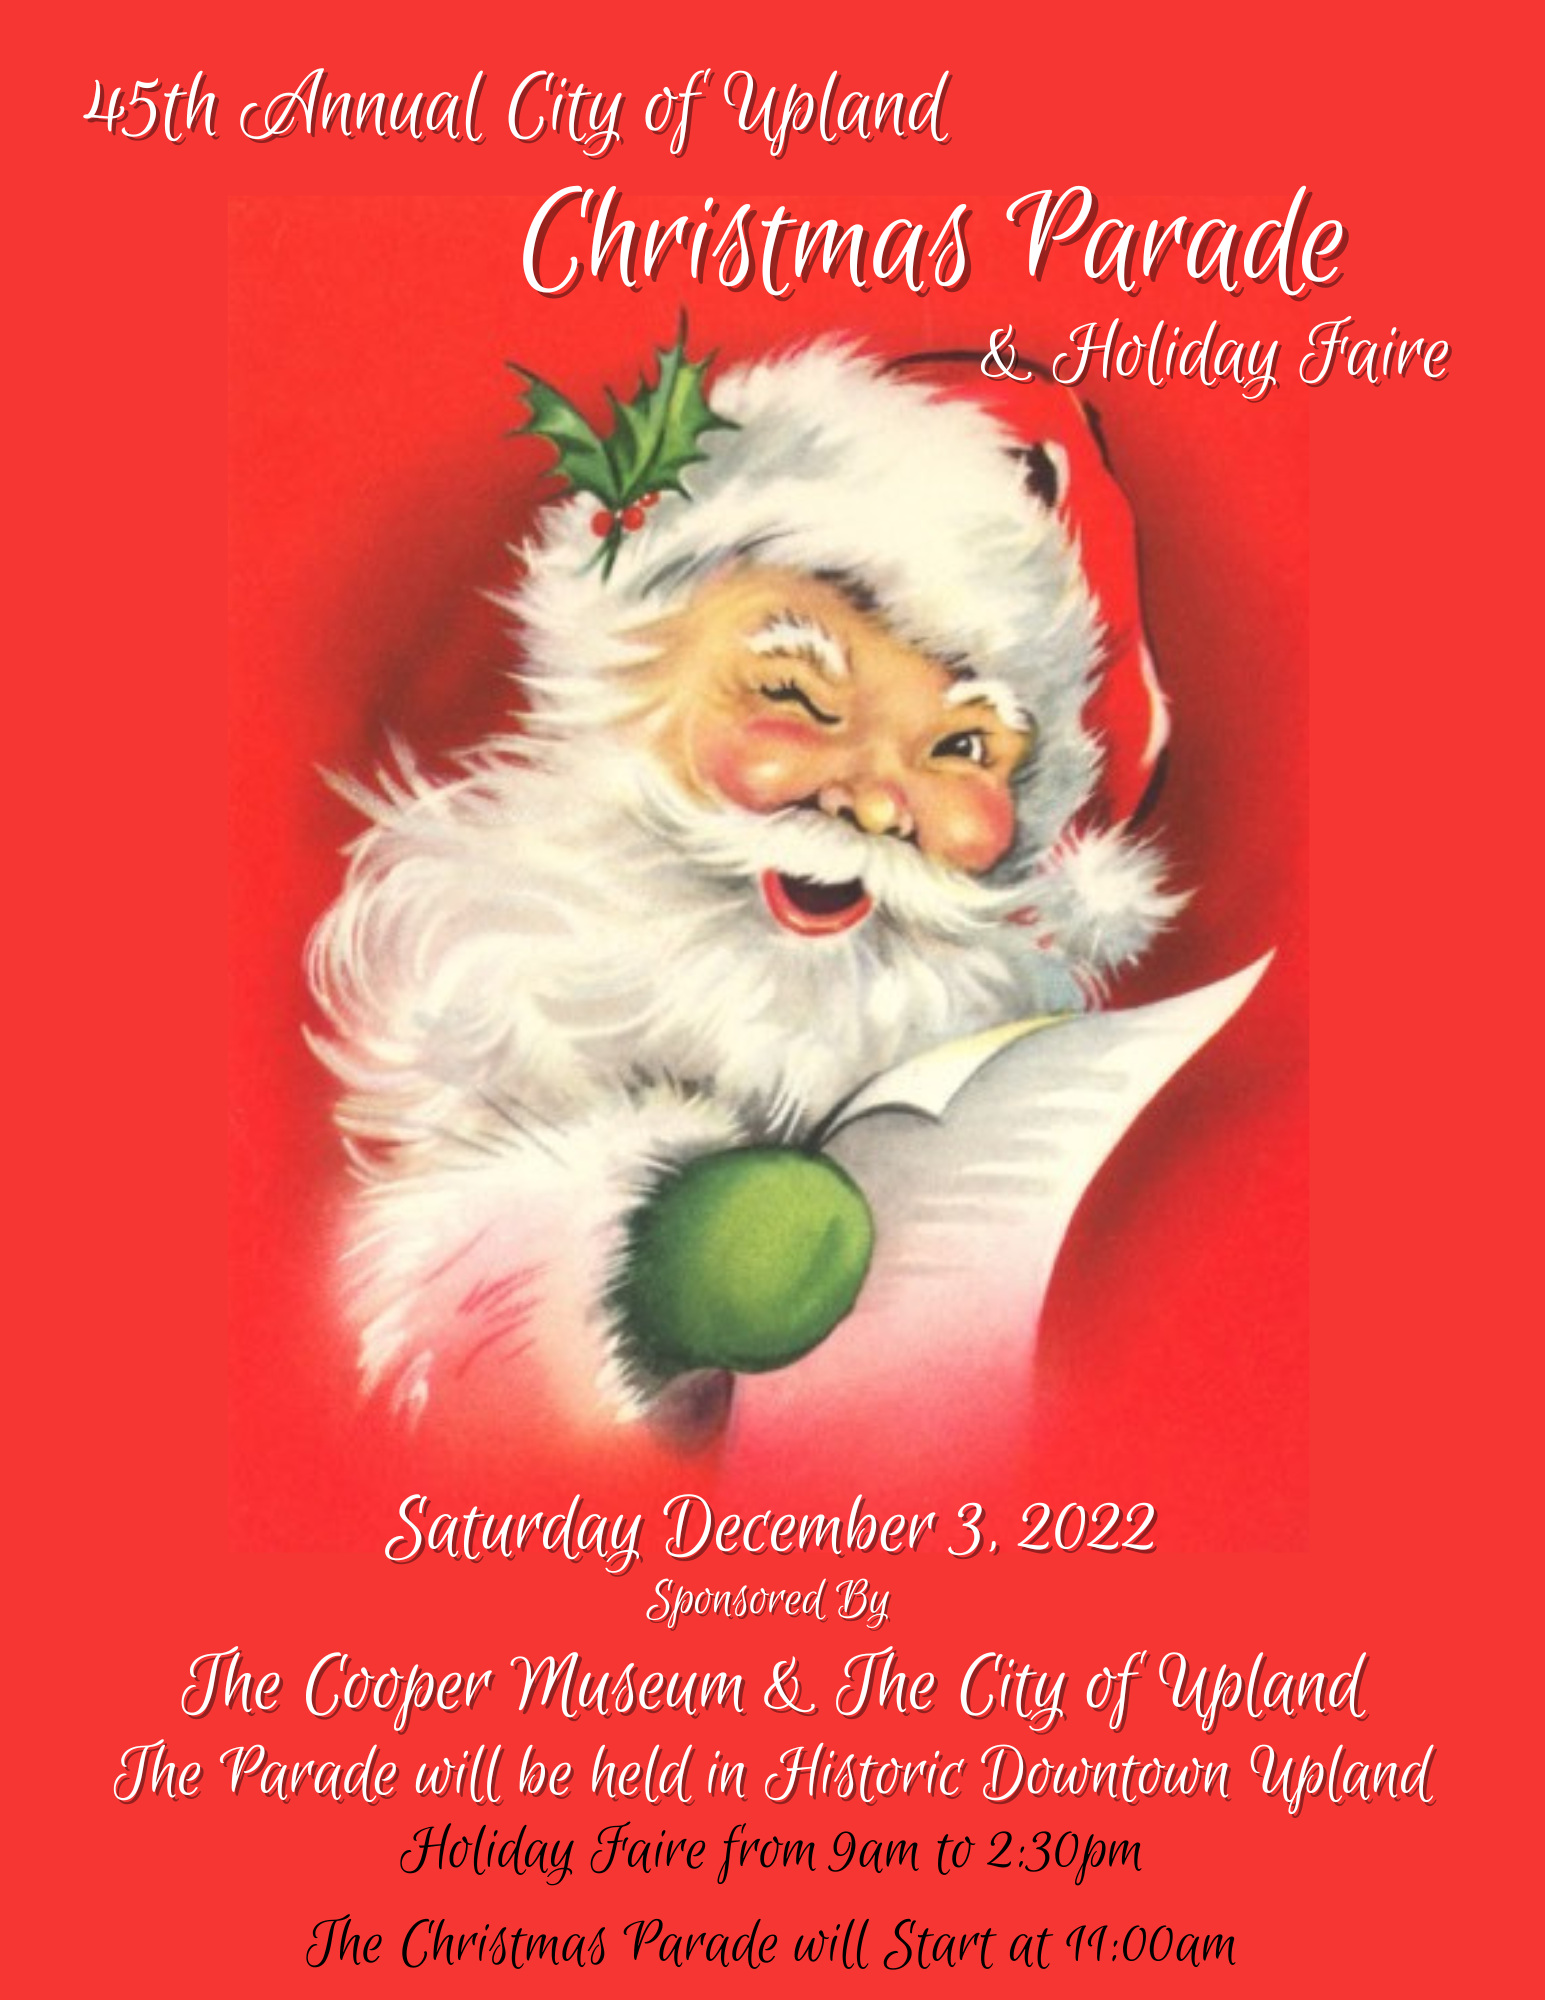 45th Annual Upland Christmas Parade and Holiday Faire, Saturday December 3, 2022. Sponsored by the Cooper Museum and the City of Upland. The Parade will be held in Historic Downtown Upland. Holiday Faire from 9am to 2:30pm, Parade starts at 11am.